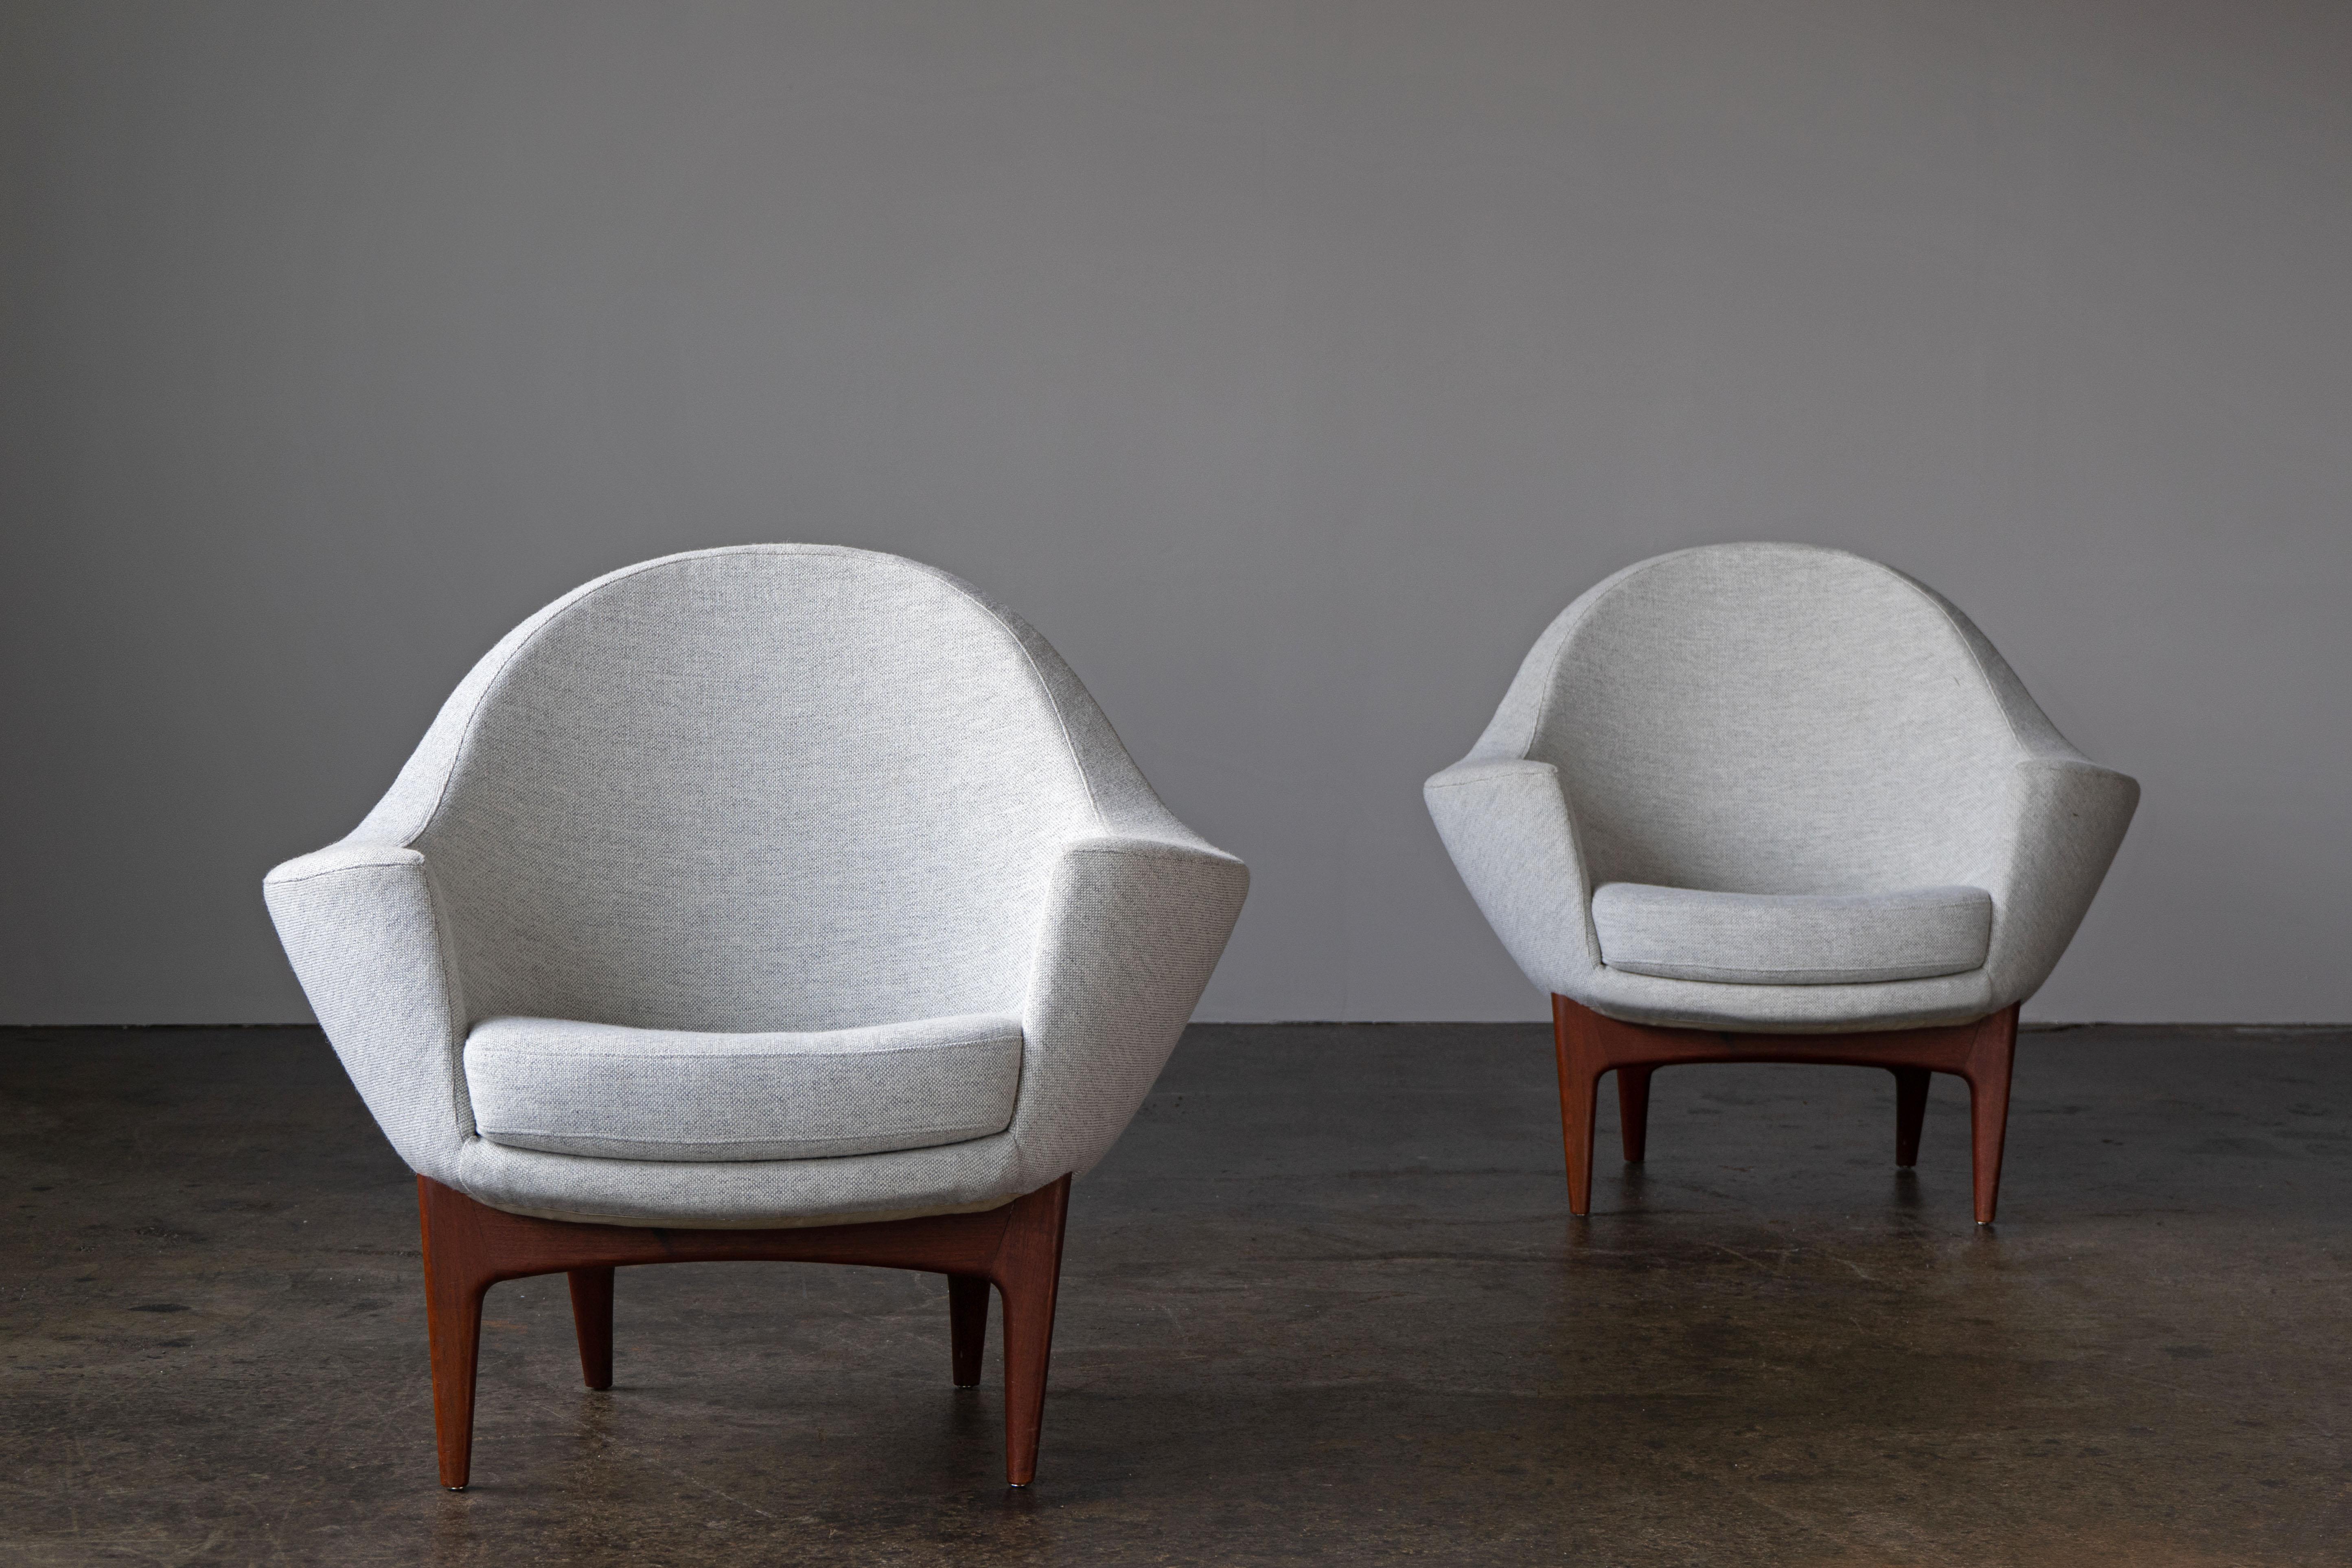 Pair of very rare lounge chairs Model 4440, designed by Ib Kofod-Larsen, designed 1958 for Fritz Hansen. Teak wood frame and great upholstery, fully restored with sophisticated wool fabric.